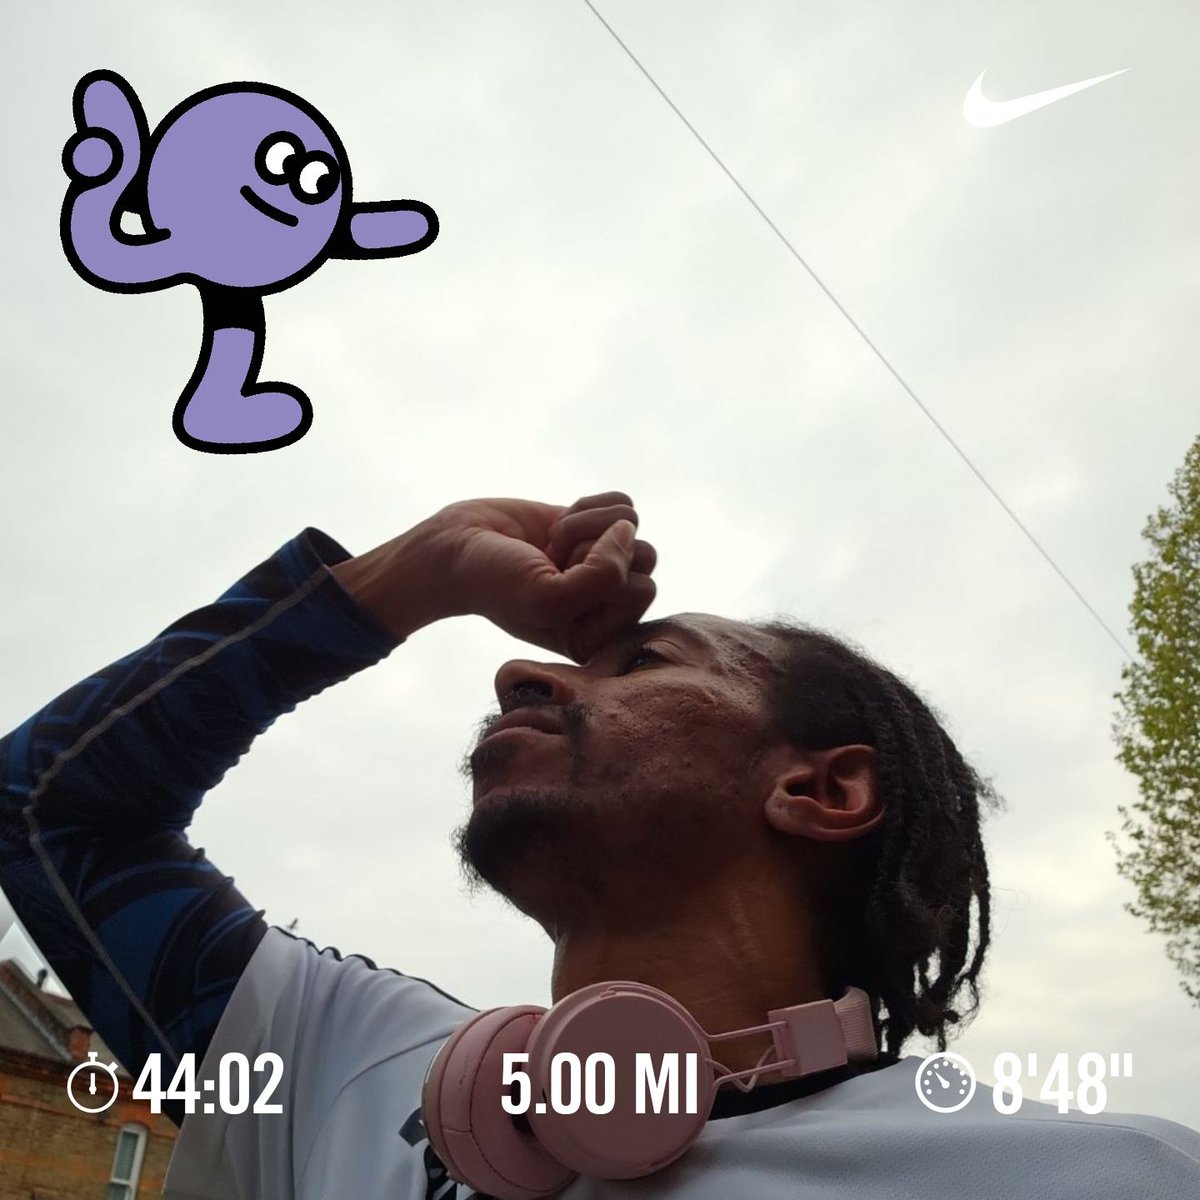 Set out to do 4 miles. Ended up doing 5. 1st mile was pretty rough. But got a second wind at 2 miles. But I need to drink more water. Have a nice evening everyone #kylevstheworld #gottagofast #running #ukrunchat @UKRunChat